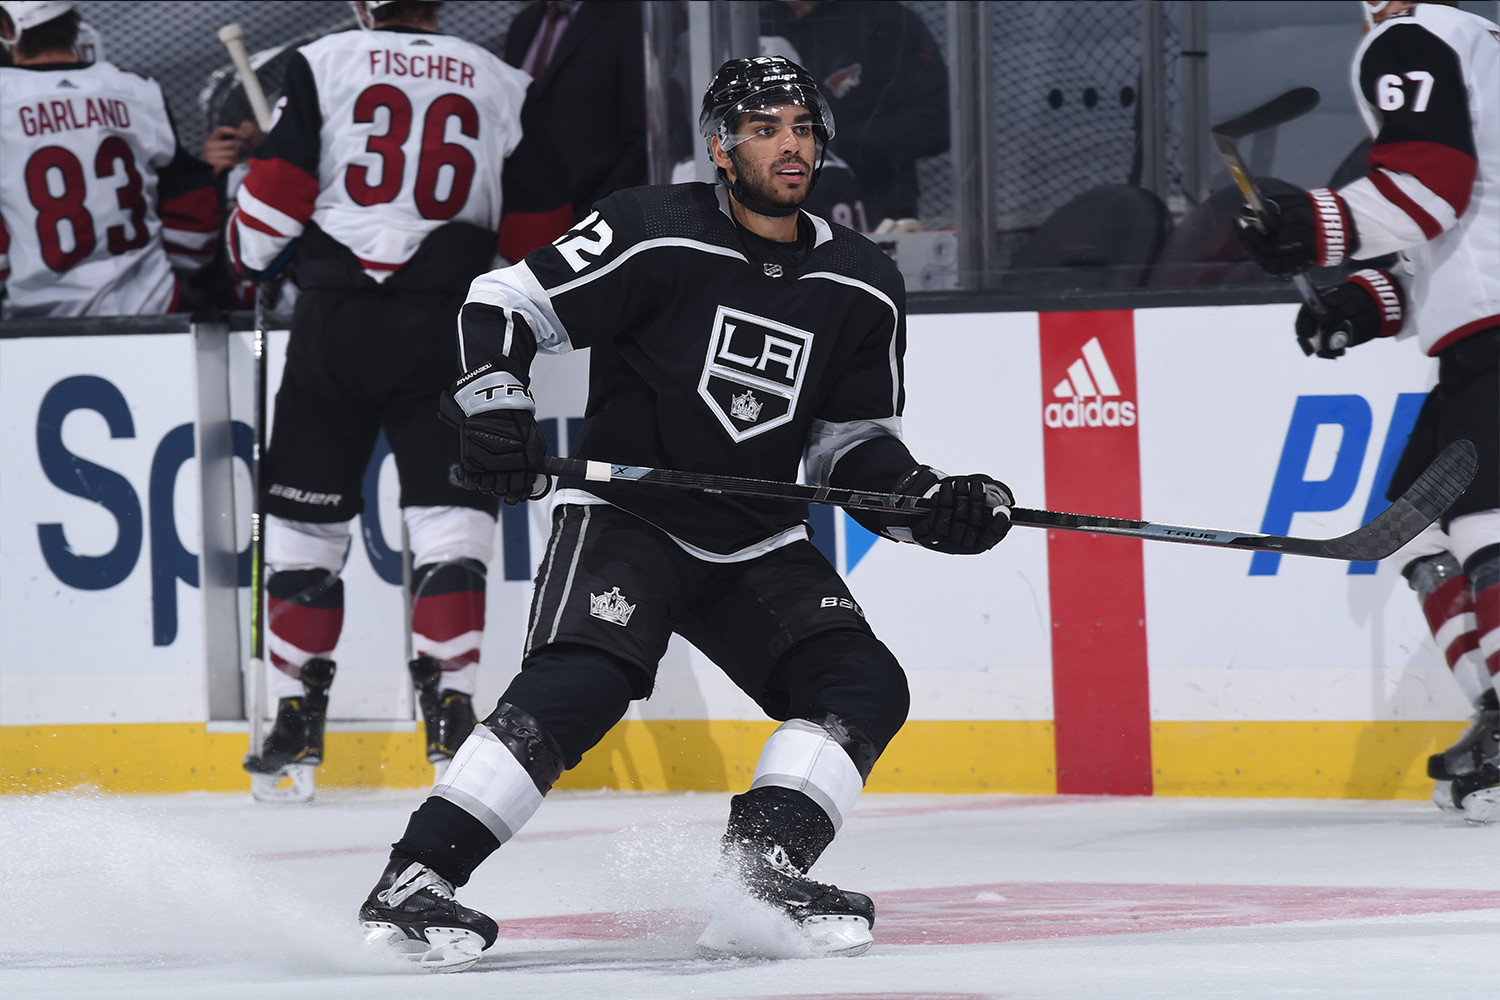 Andreas Athanasiou #22 of the Los Angeles Kings skates on the ice during the third period against the Arizona Coyotes at STAPLES Center on April 7, 2021